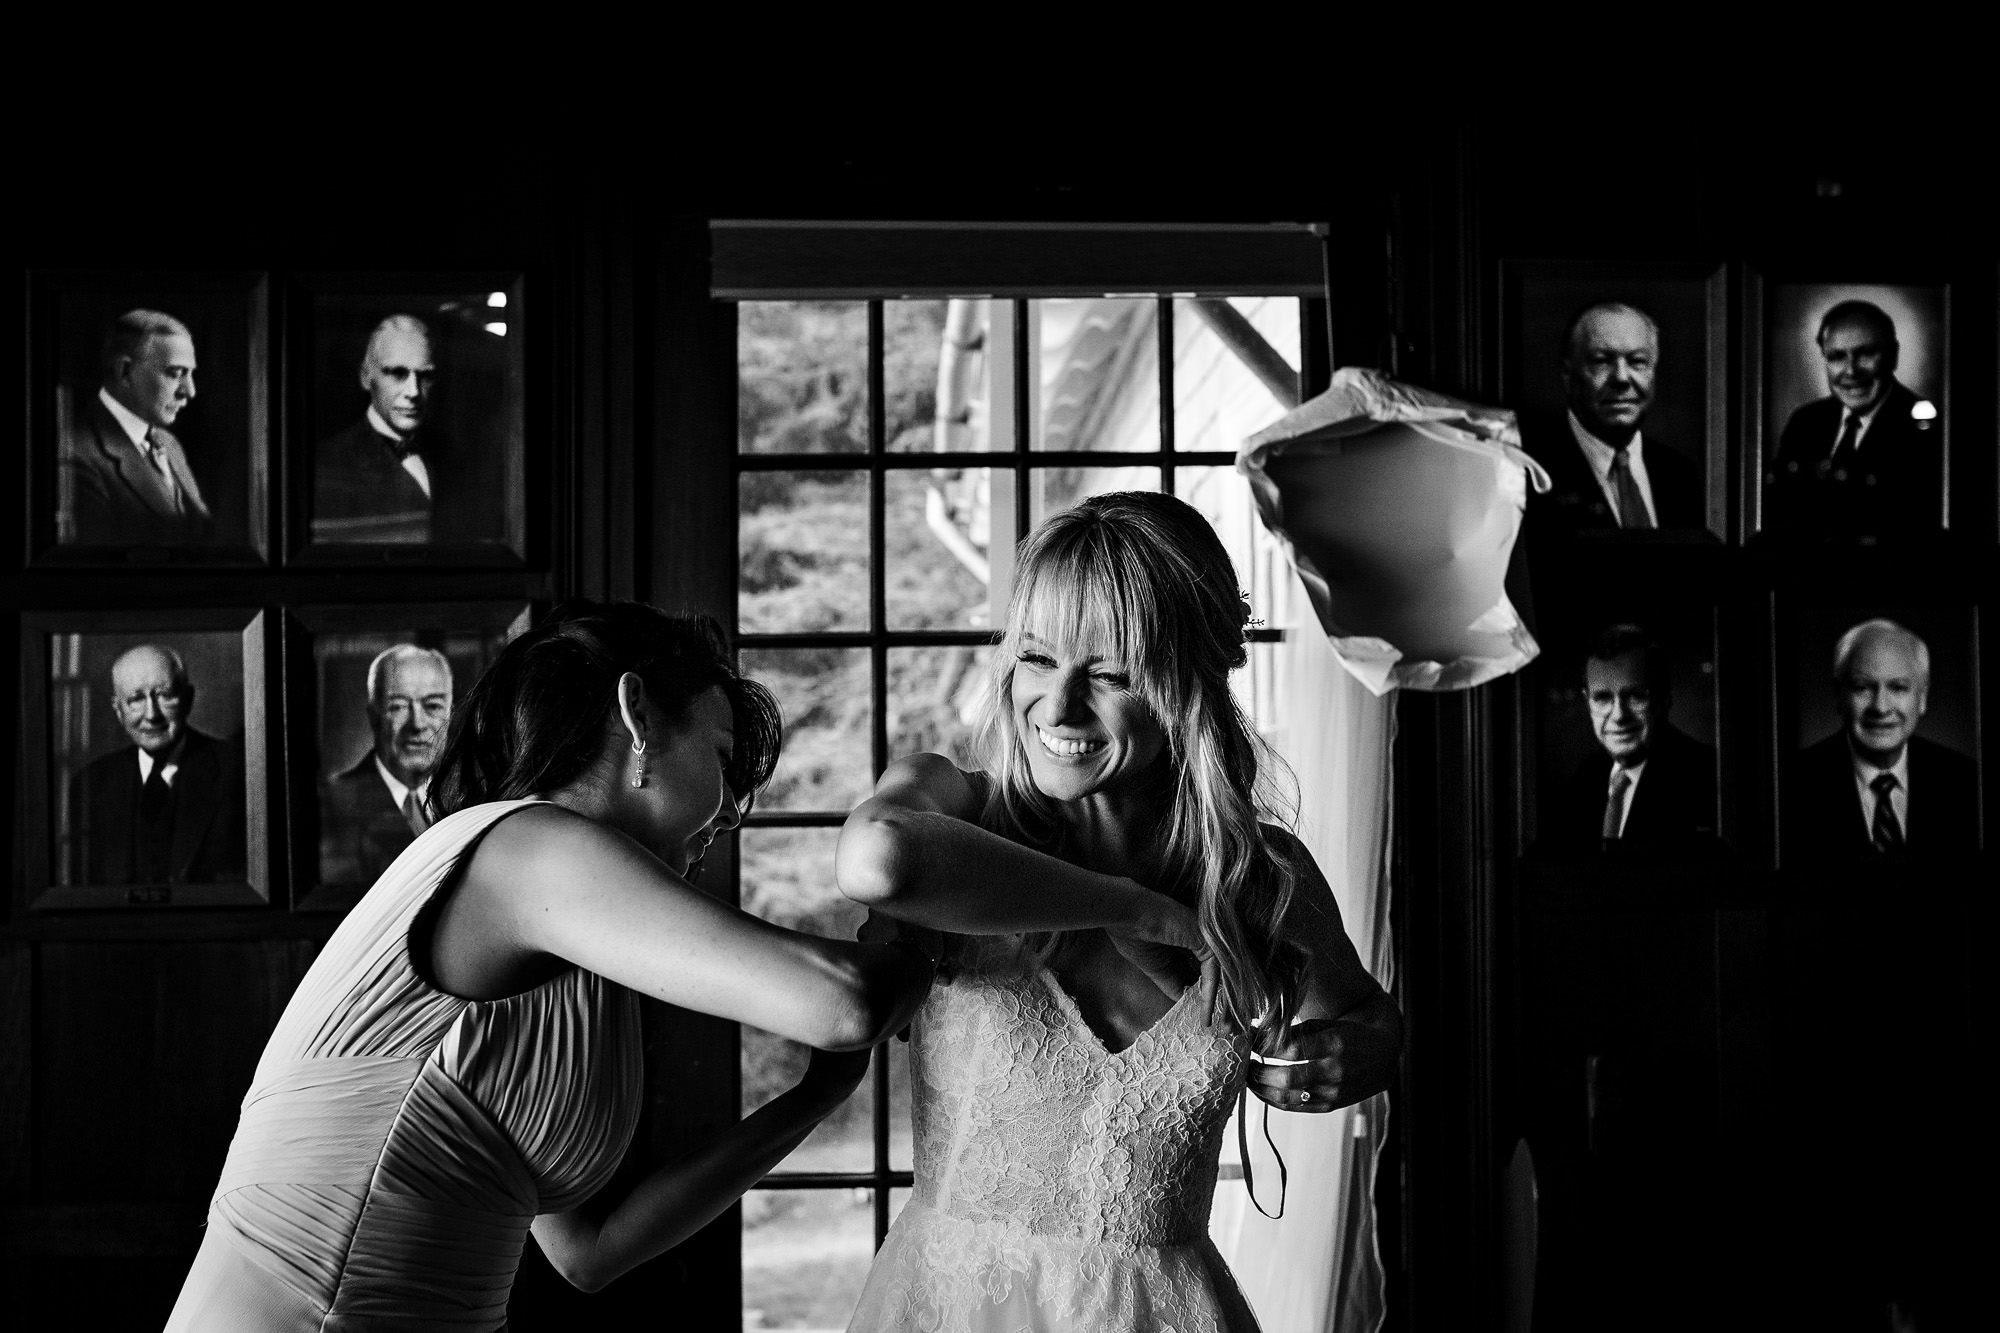 A bride puts on her wedding dress while the portraits of men hang in the background.